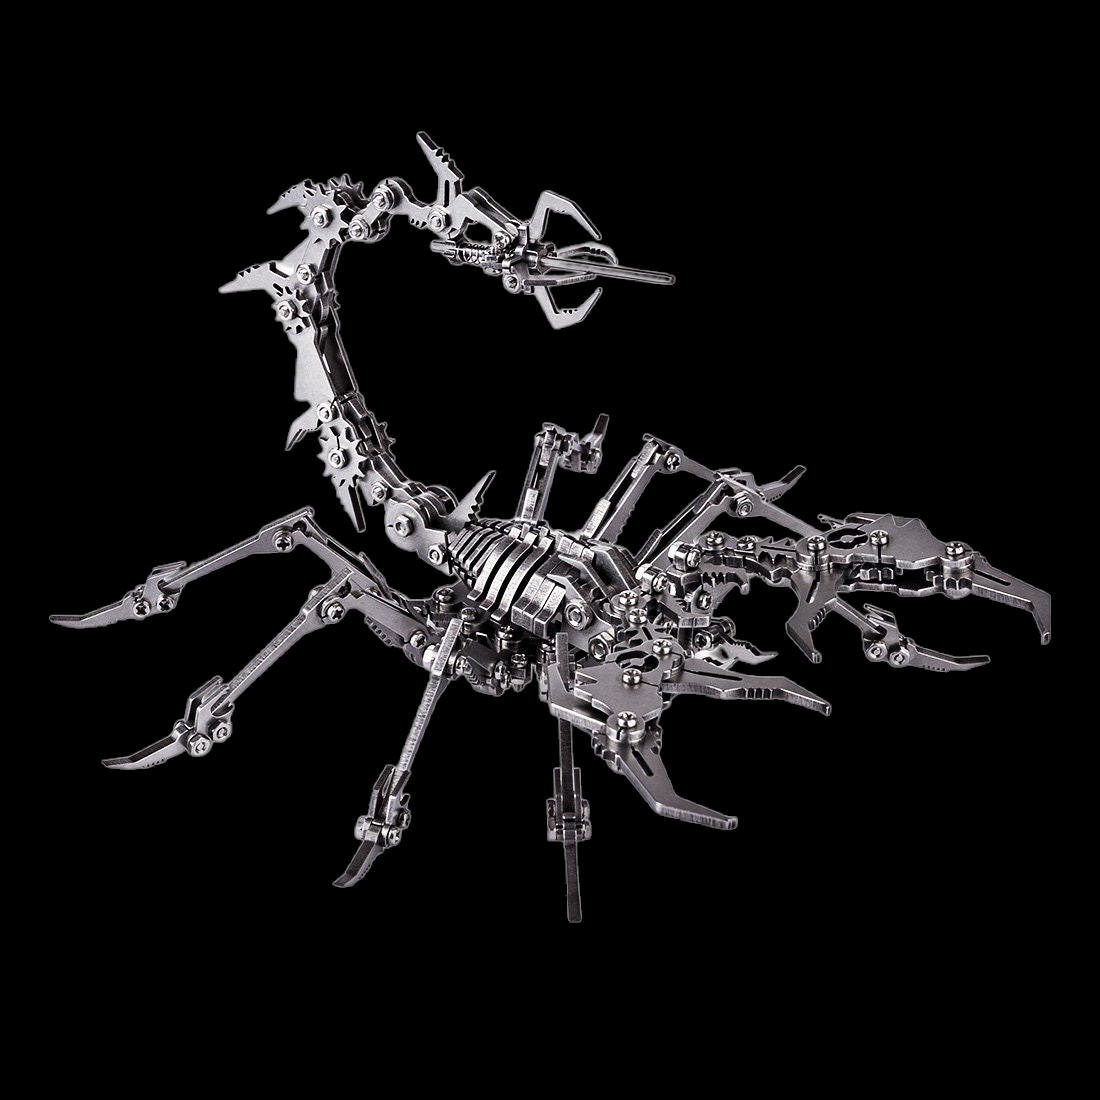 3D Mechanical Scorpion Assembly Kit: Detailed Metal Insect Puzzle for Crafting Enthusiasts